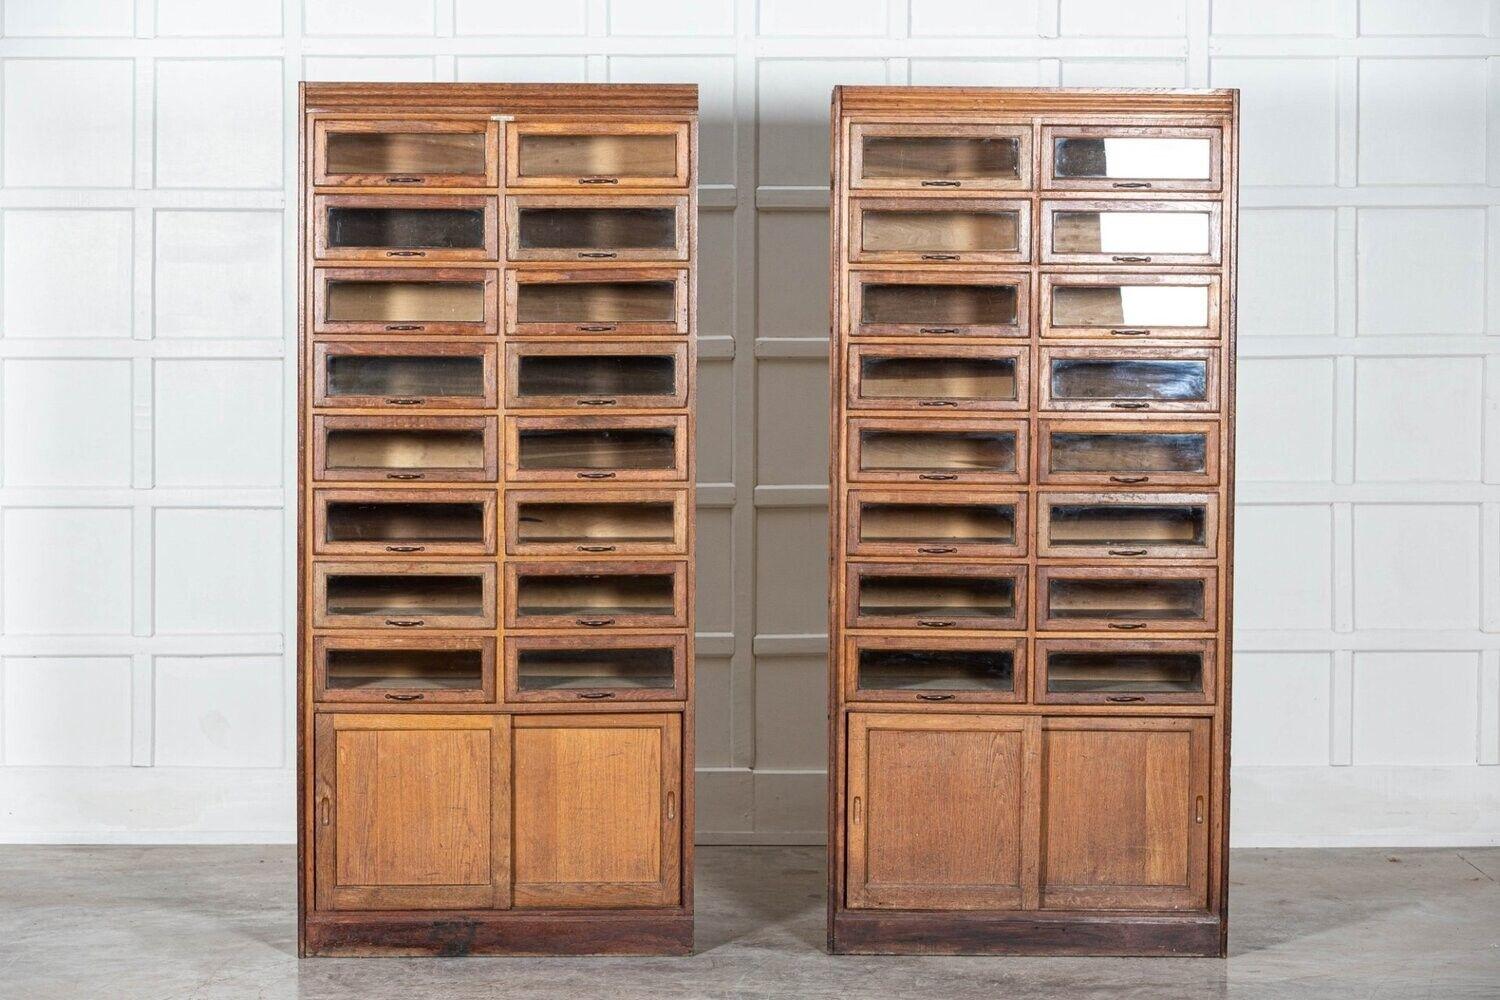 circa 1930
Large English Oak Haberdashery Cabinet, divides into two pieces.
sku 1254
W182 x D52 x H198cm